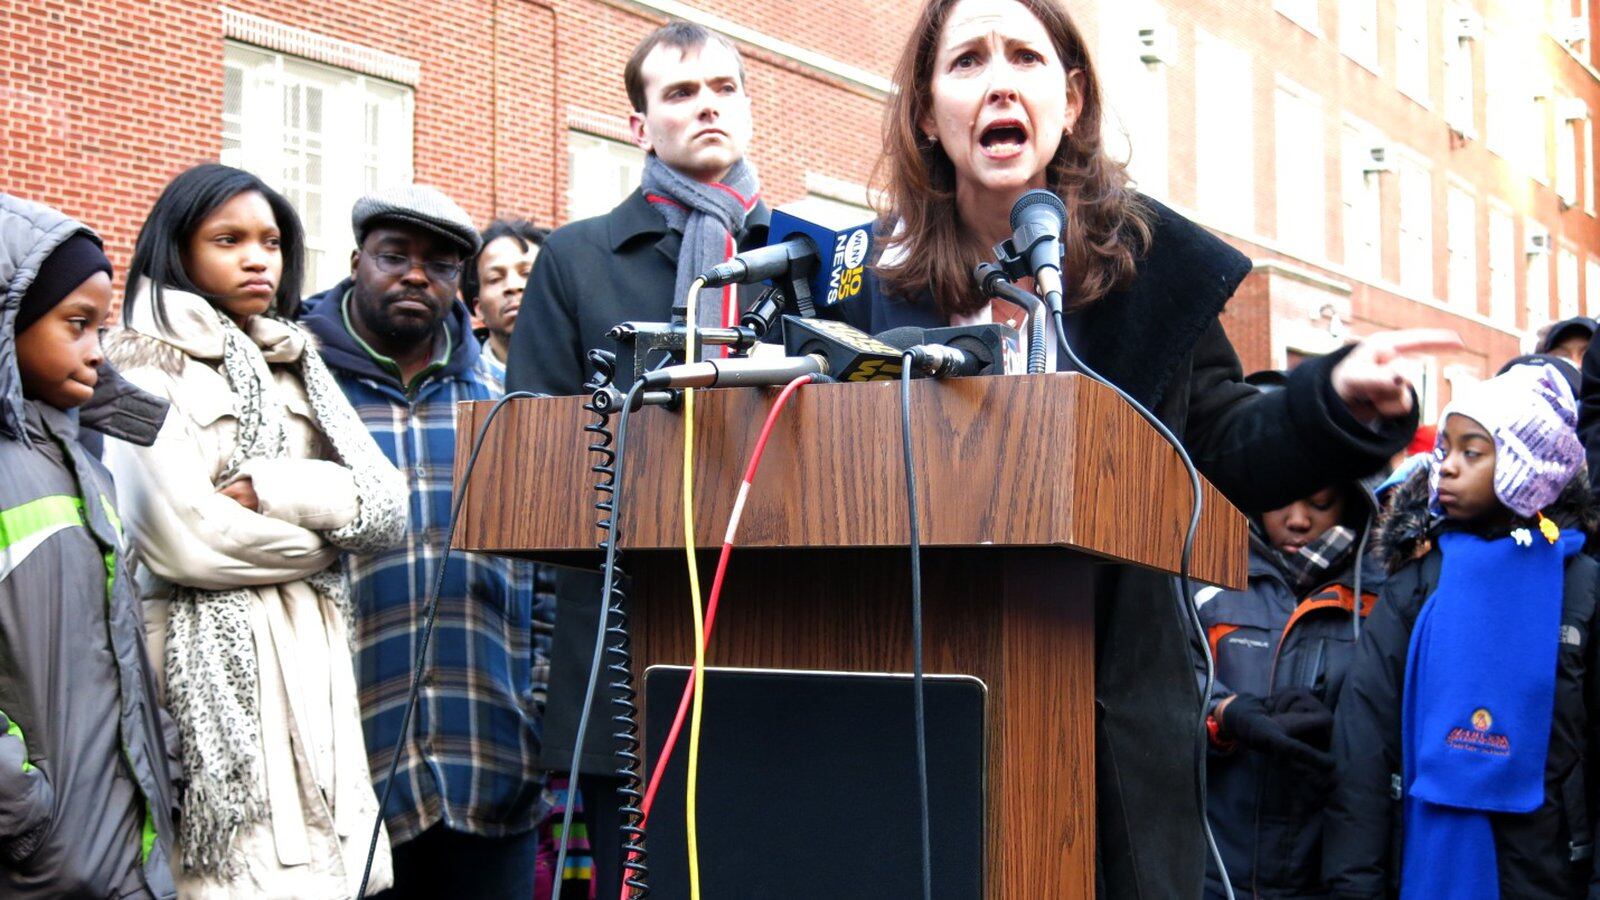 demy CEO Eva Moskowitz railed against the city's decision to cancel three previously approved co-locations involving Success schools during a press conference Thursday outside of Success Academy Harlem 4.